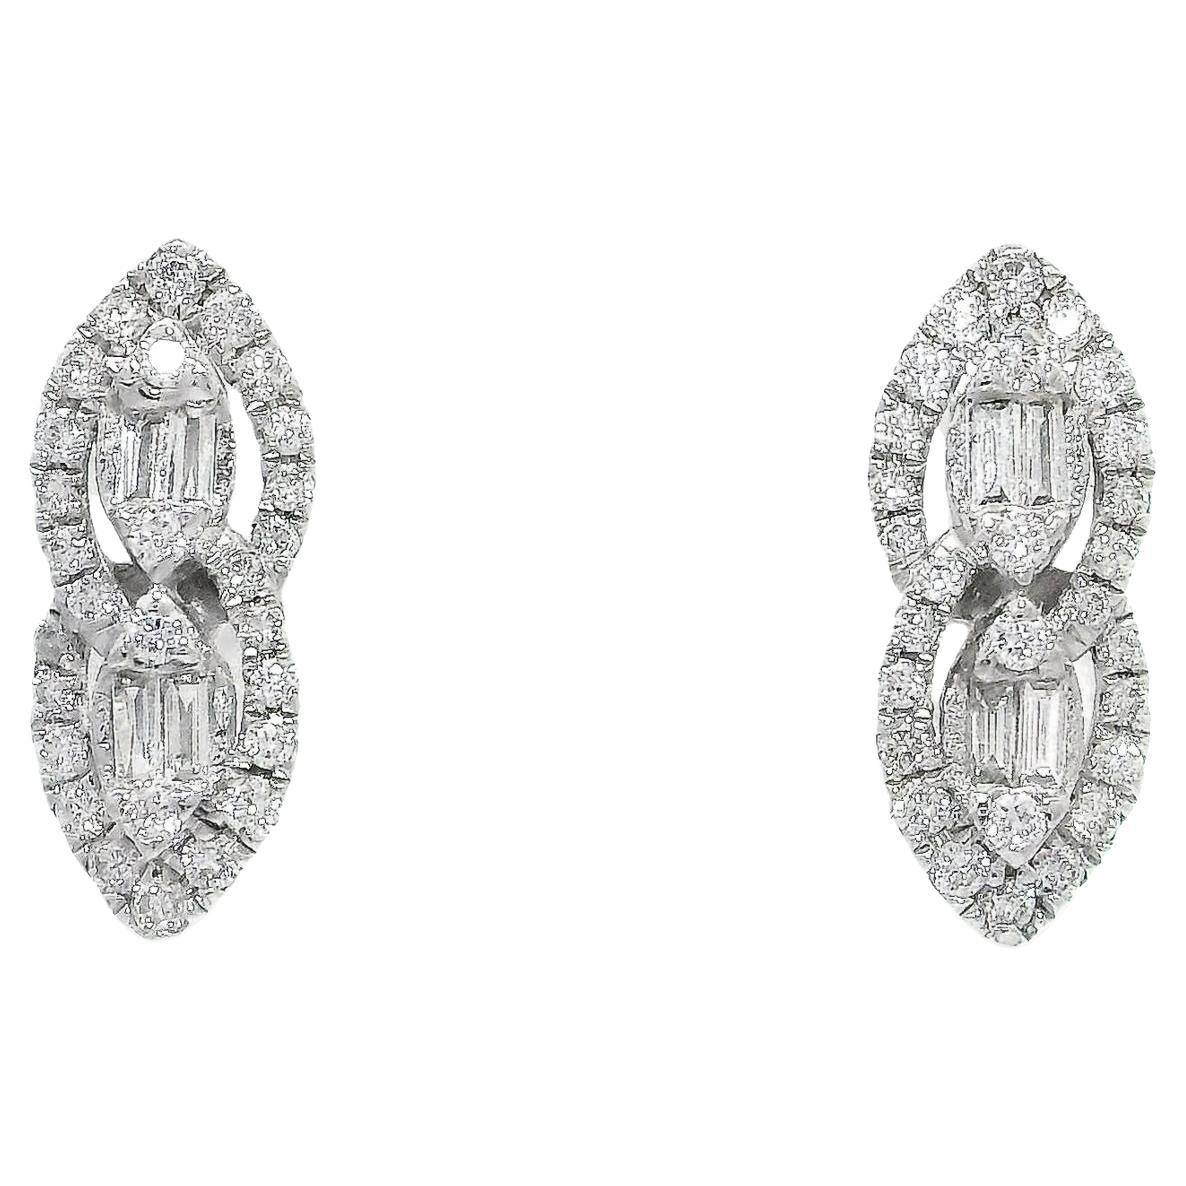 Marquis-shaped Halo Diamond Stud Earrings in 18K White Gold